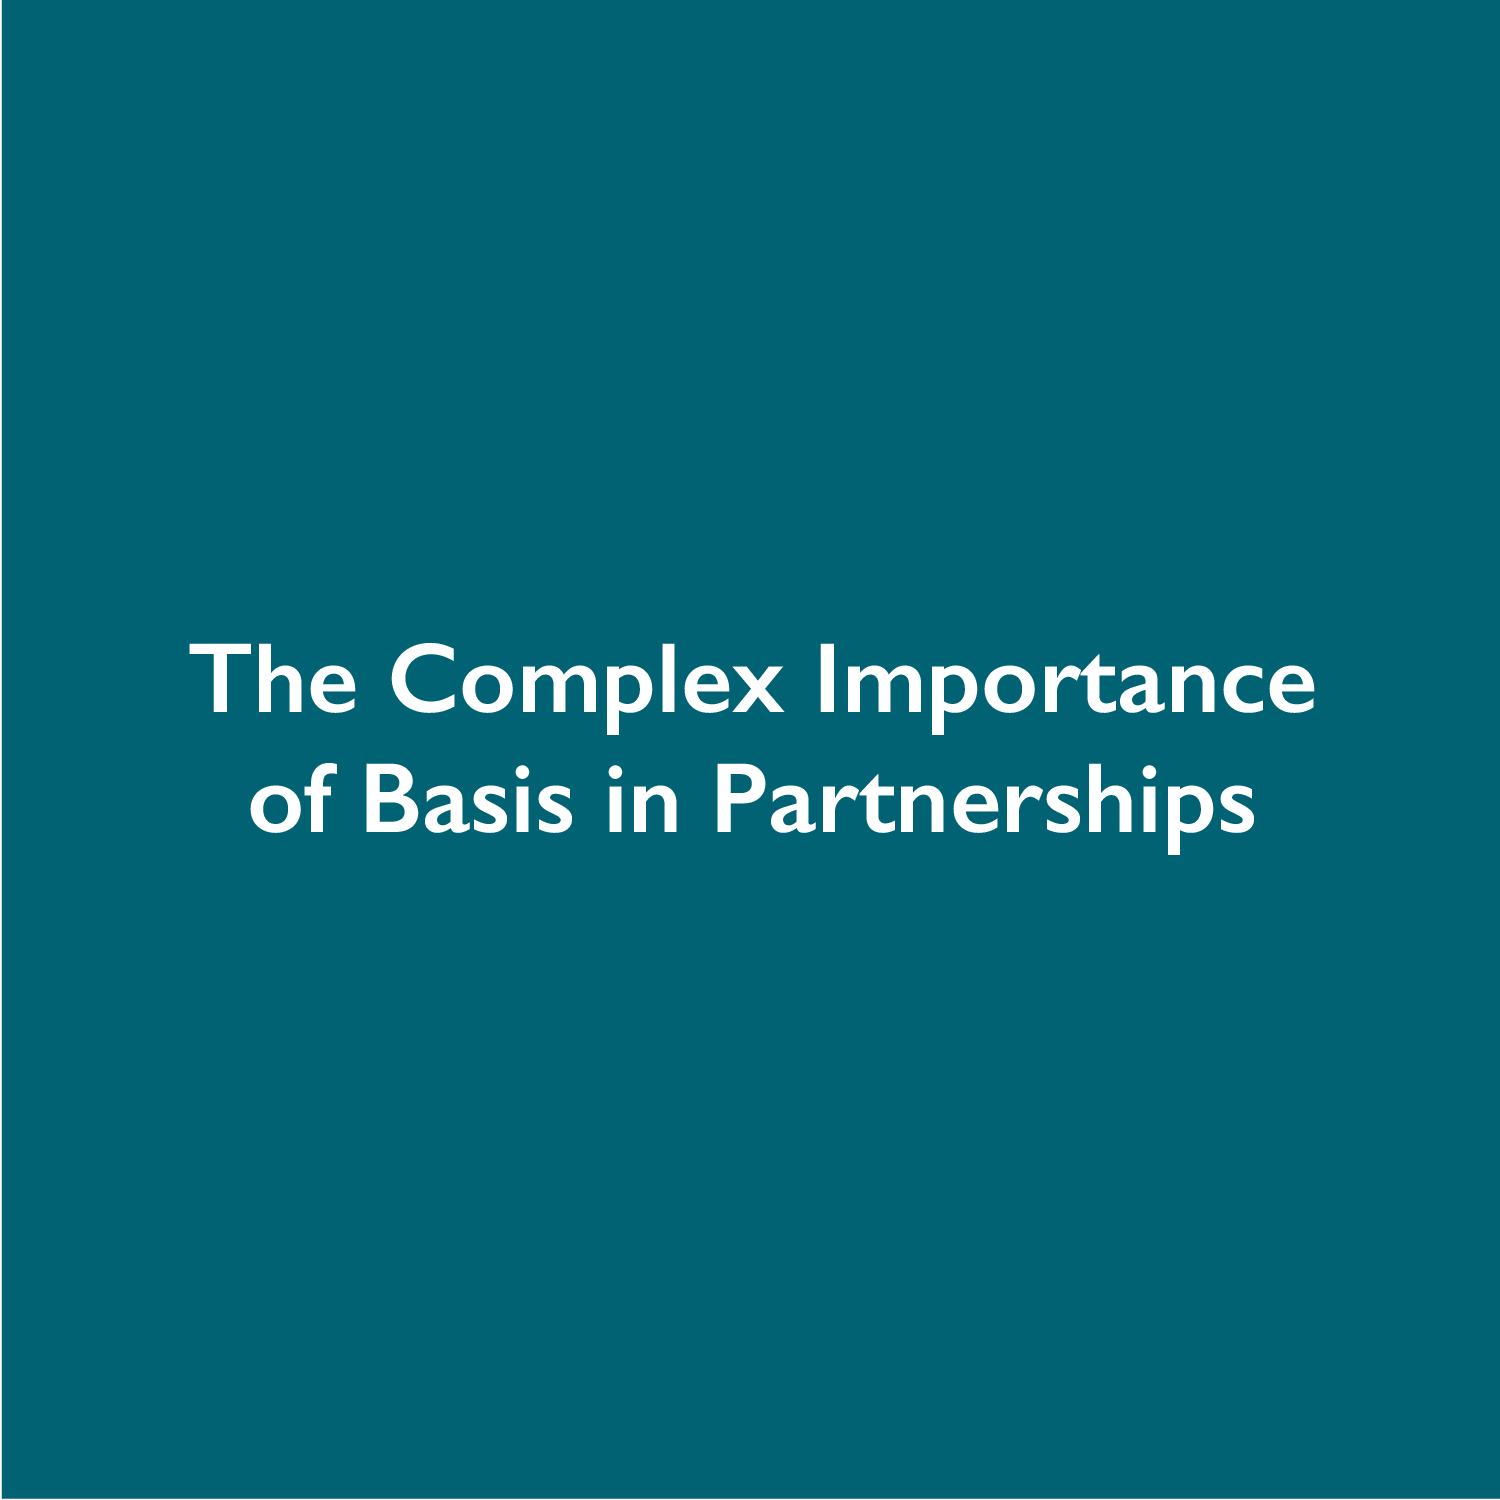 The Complex Importance of Basis in Partnerships